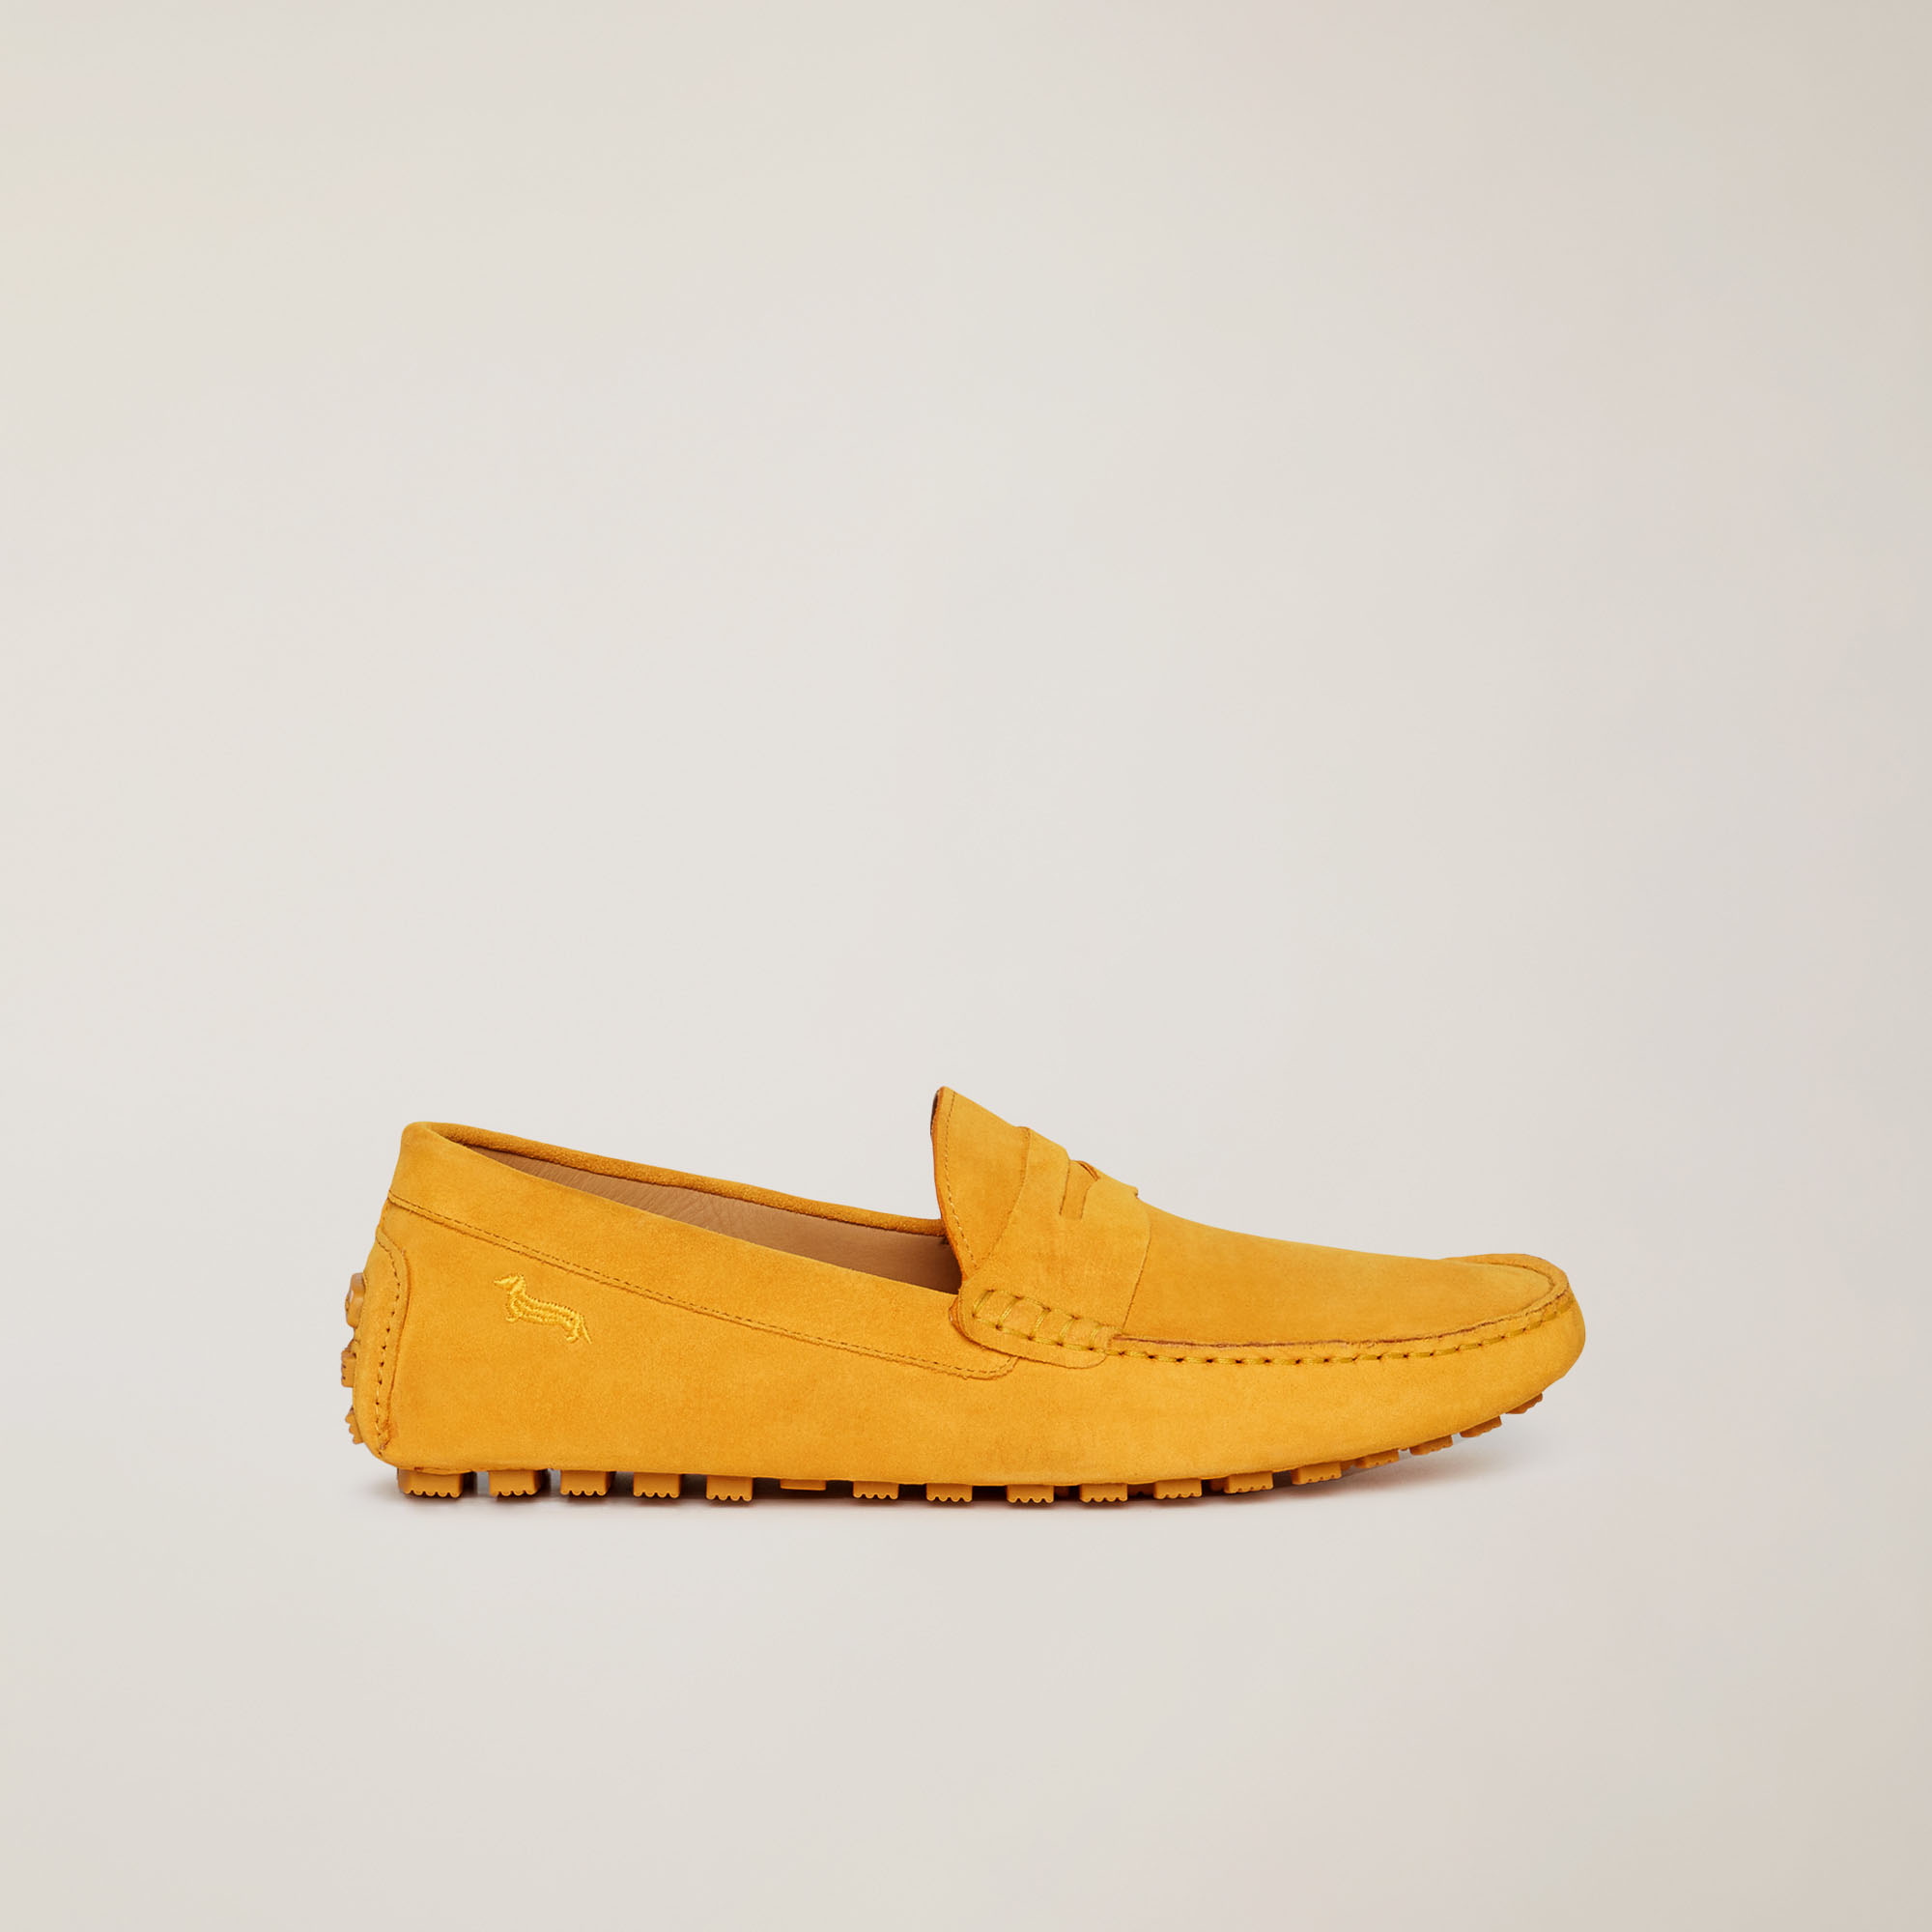 Loafer with Cleats, Yellow, large